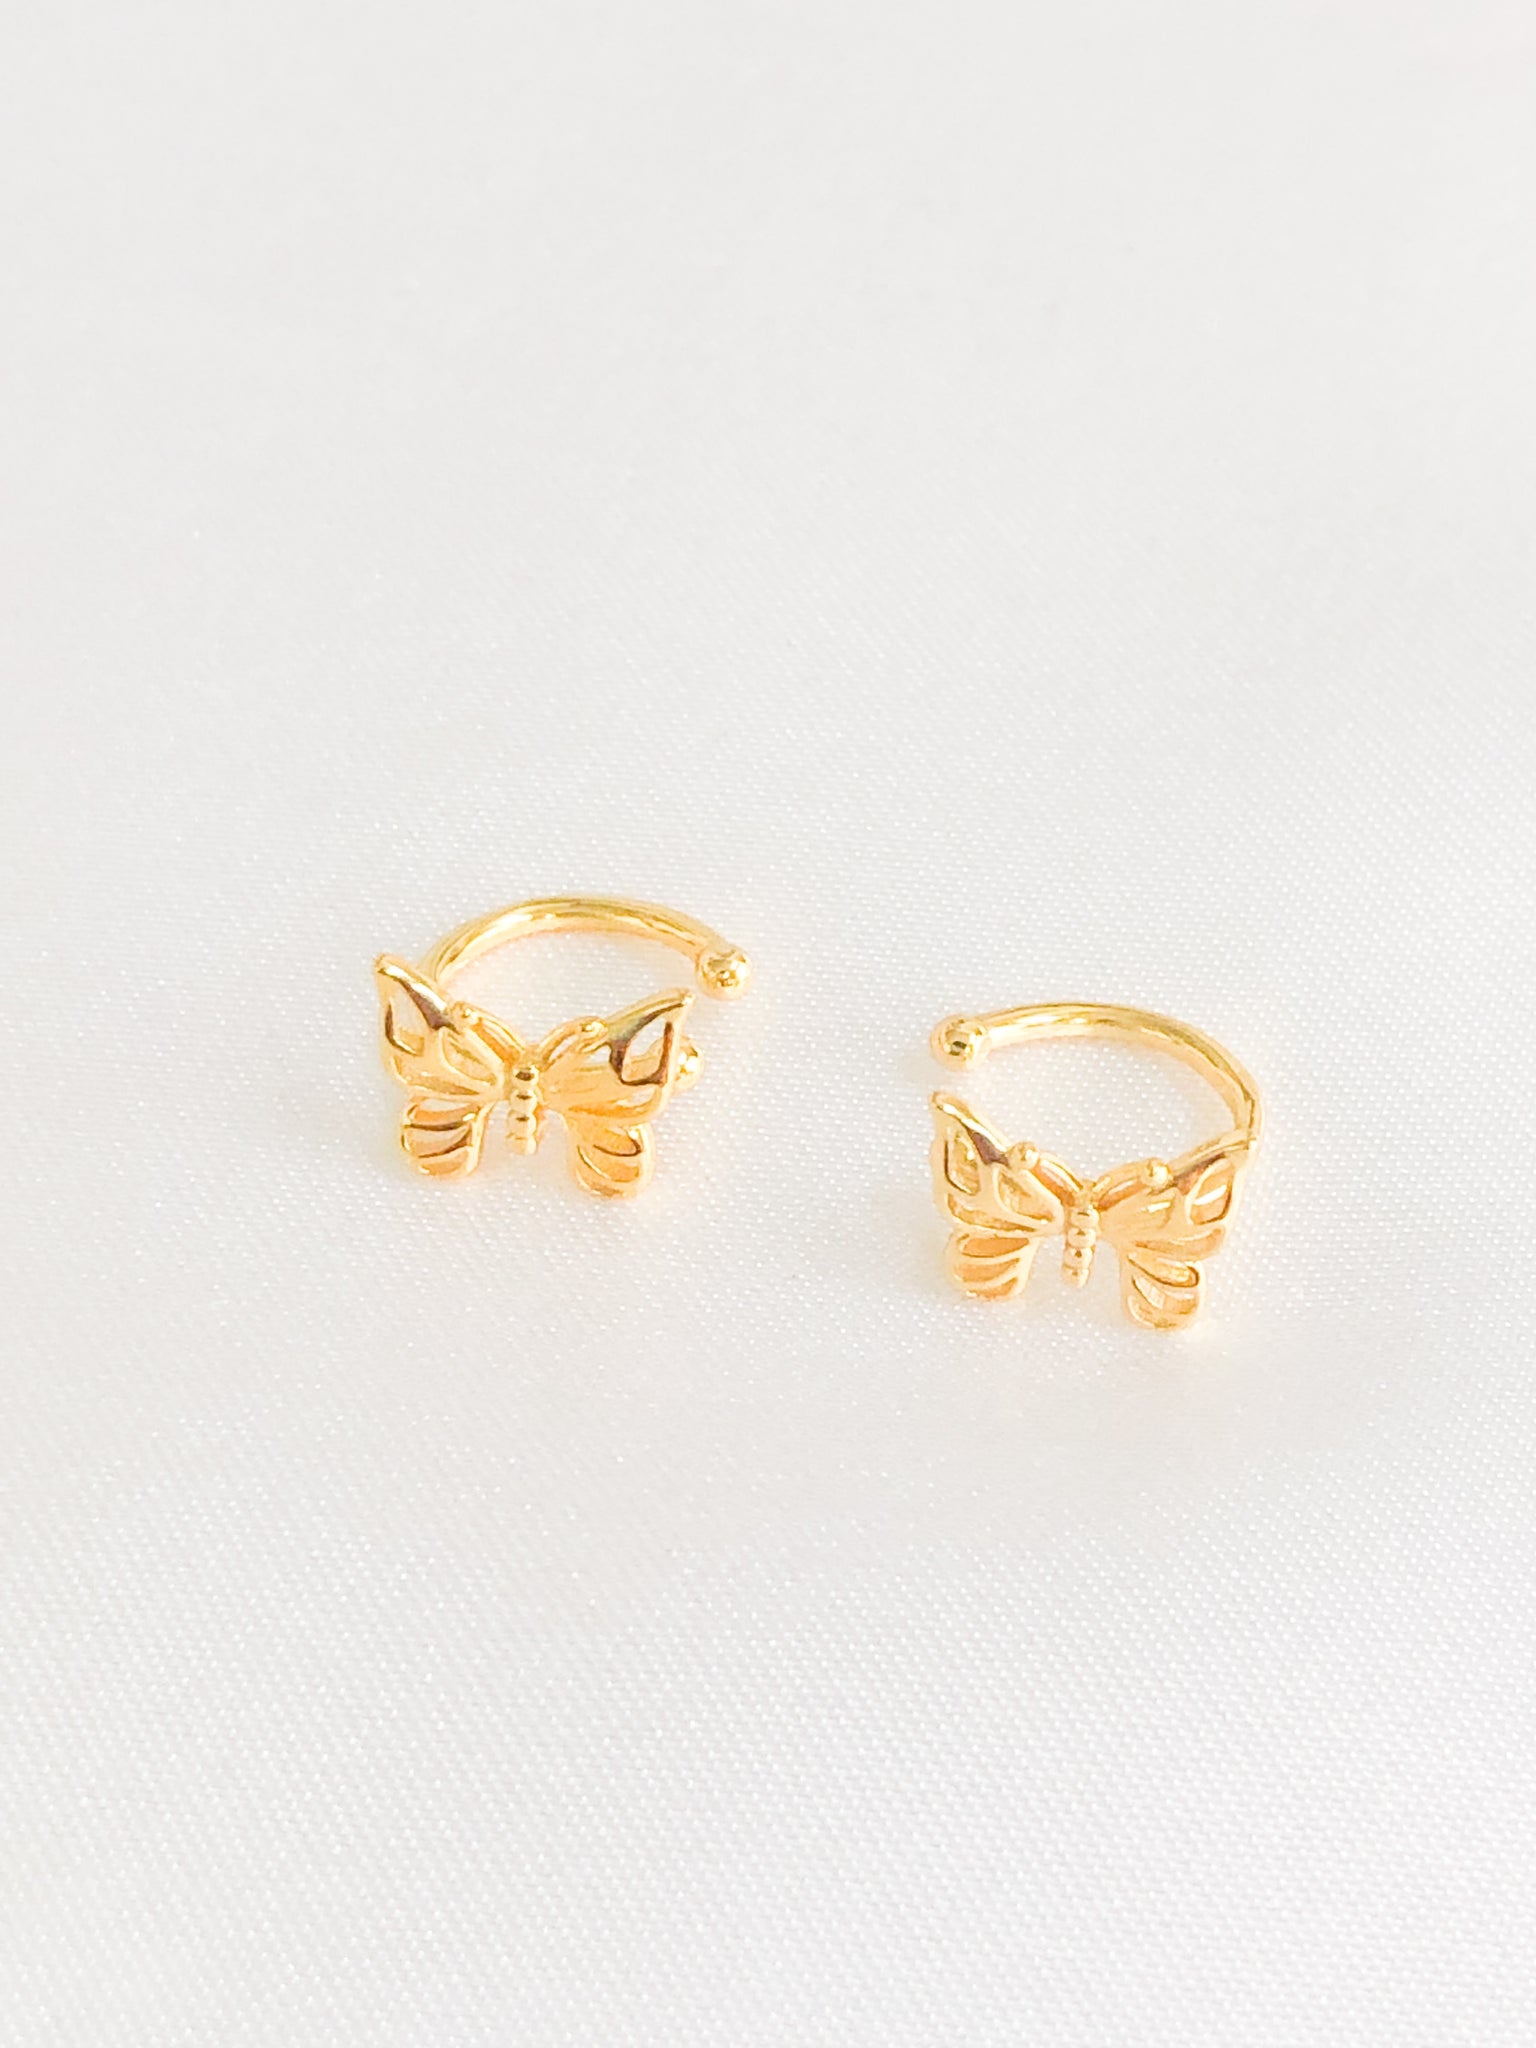 Upgrade your jewelry collection with our gold butterfly ear cuff, a unique and trendy accessory that adds a touch of whimsy to any outfit. The ear cuff features delicate butterfly wings with a shimmering gold-tone finish, measuring approximately 1 inch in length. The cuff is designed for comfortable and secure wear, even for those without pierced ears. 